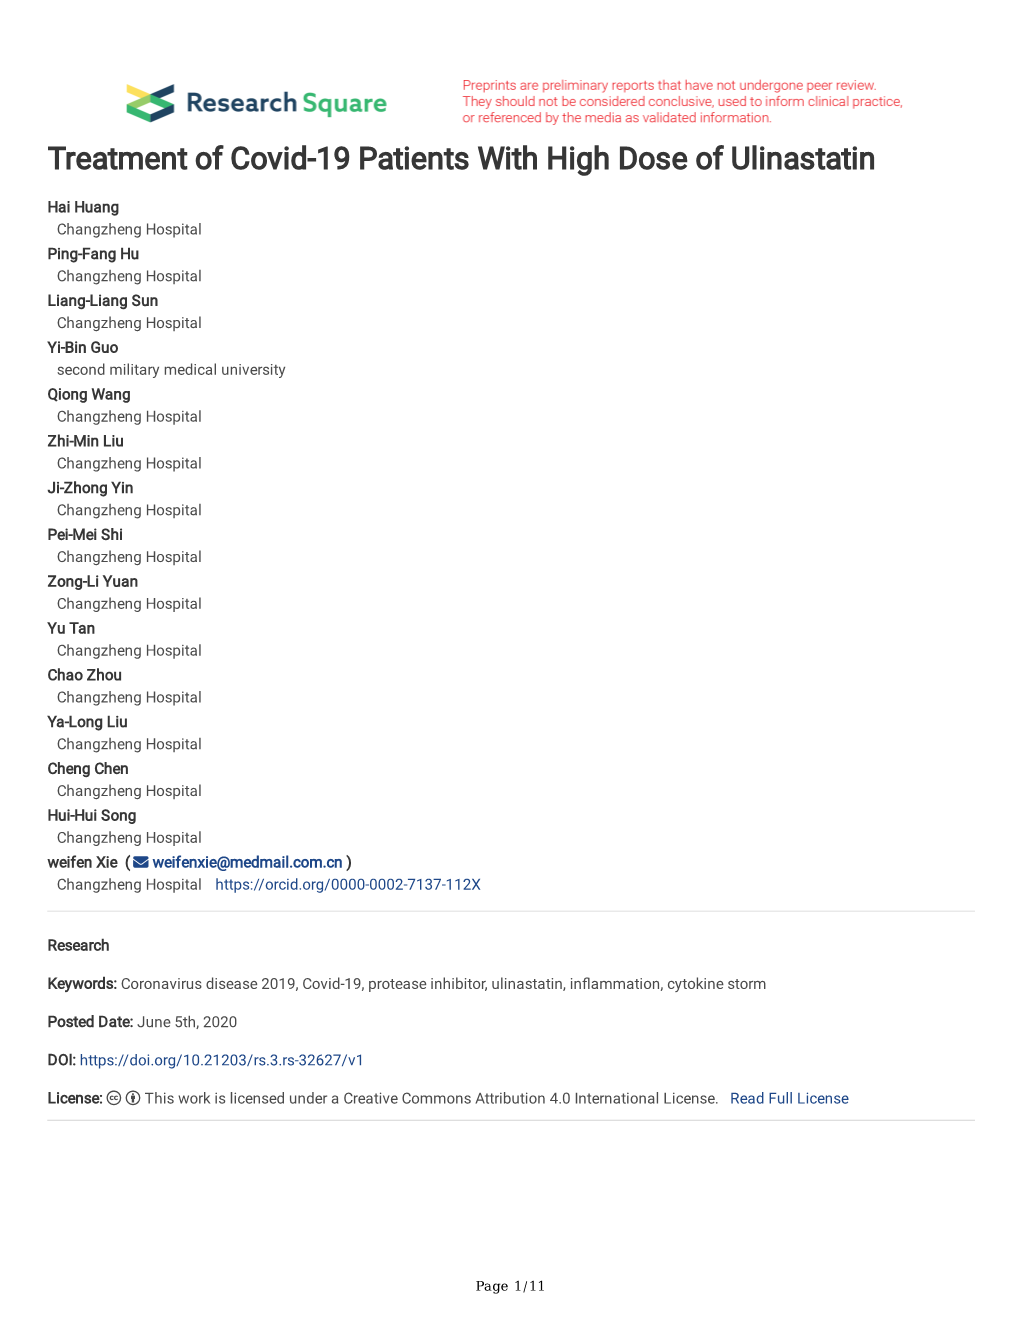 Treatment of Covid-19 Patients with High Dose of Ulinastatin